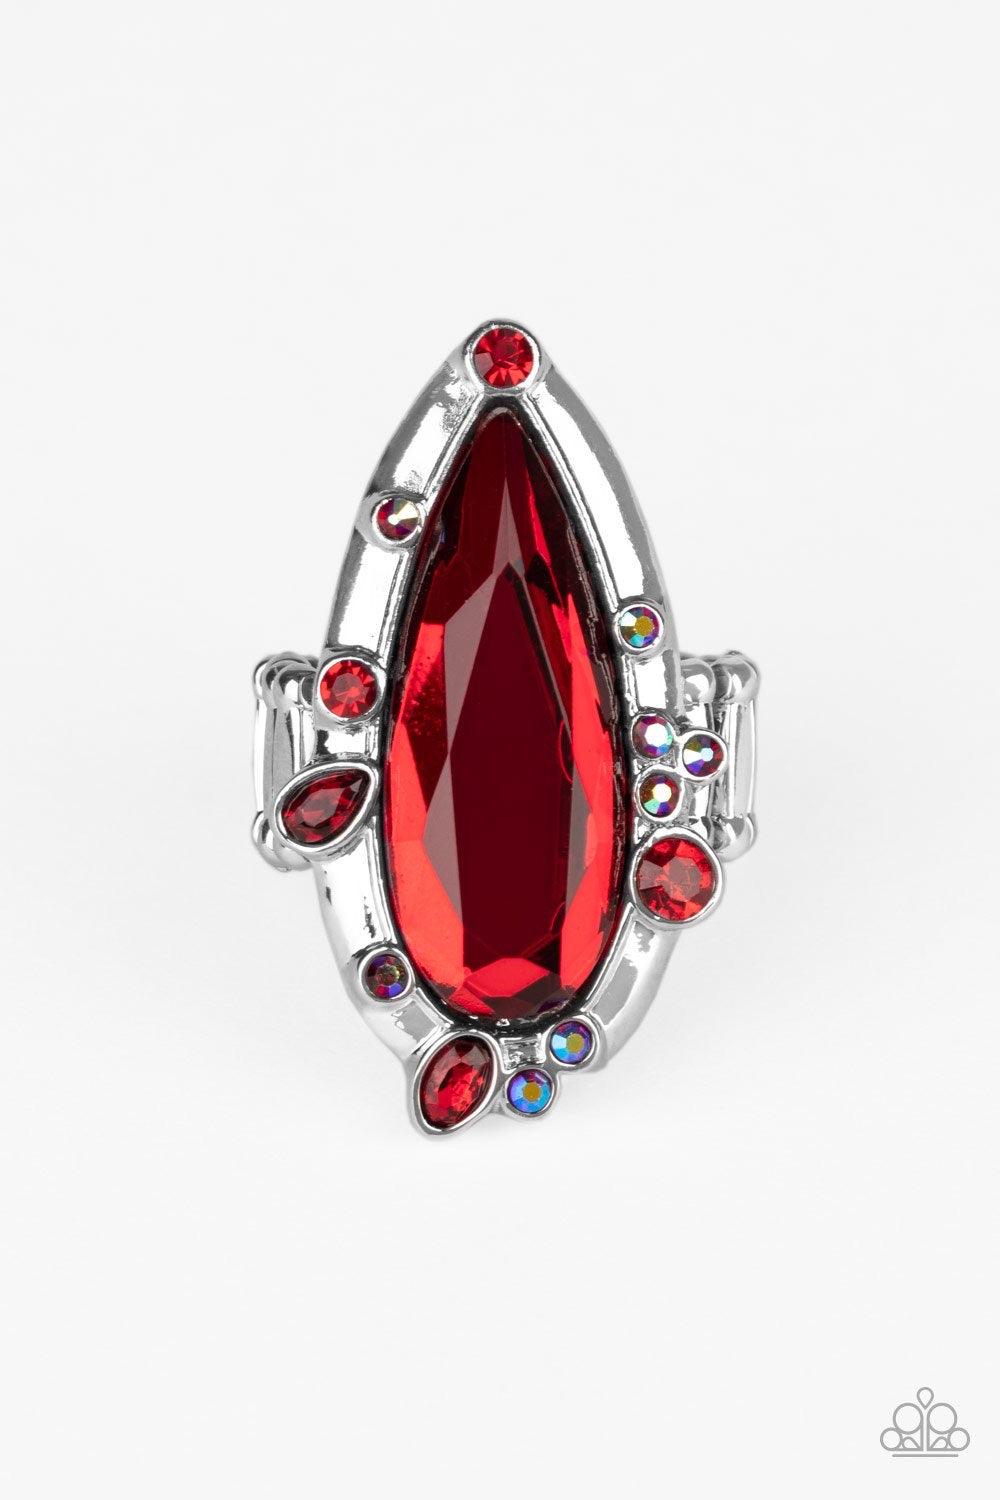 Paparazzi Accessories Sparkle Smitten - Red Varying in color and shape, mismatched red iridescent rhinestones sporadically dot the front of a shiny silver teardrop frame. Featuring a flashy faceted surface, an oversized red teardrop gem adorns the center